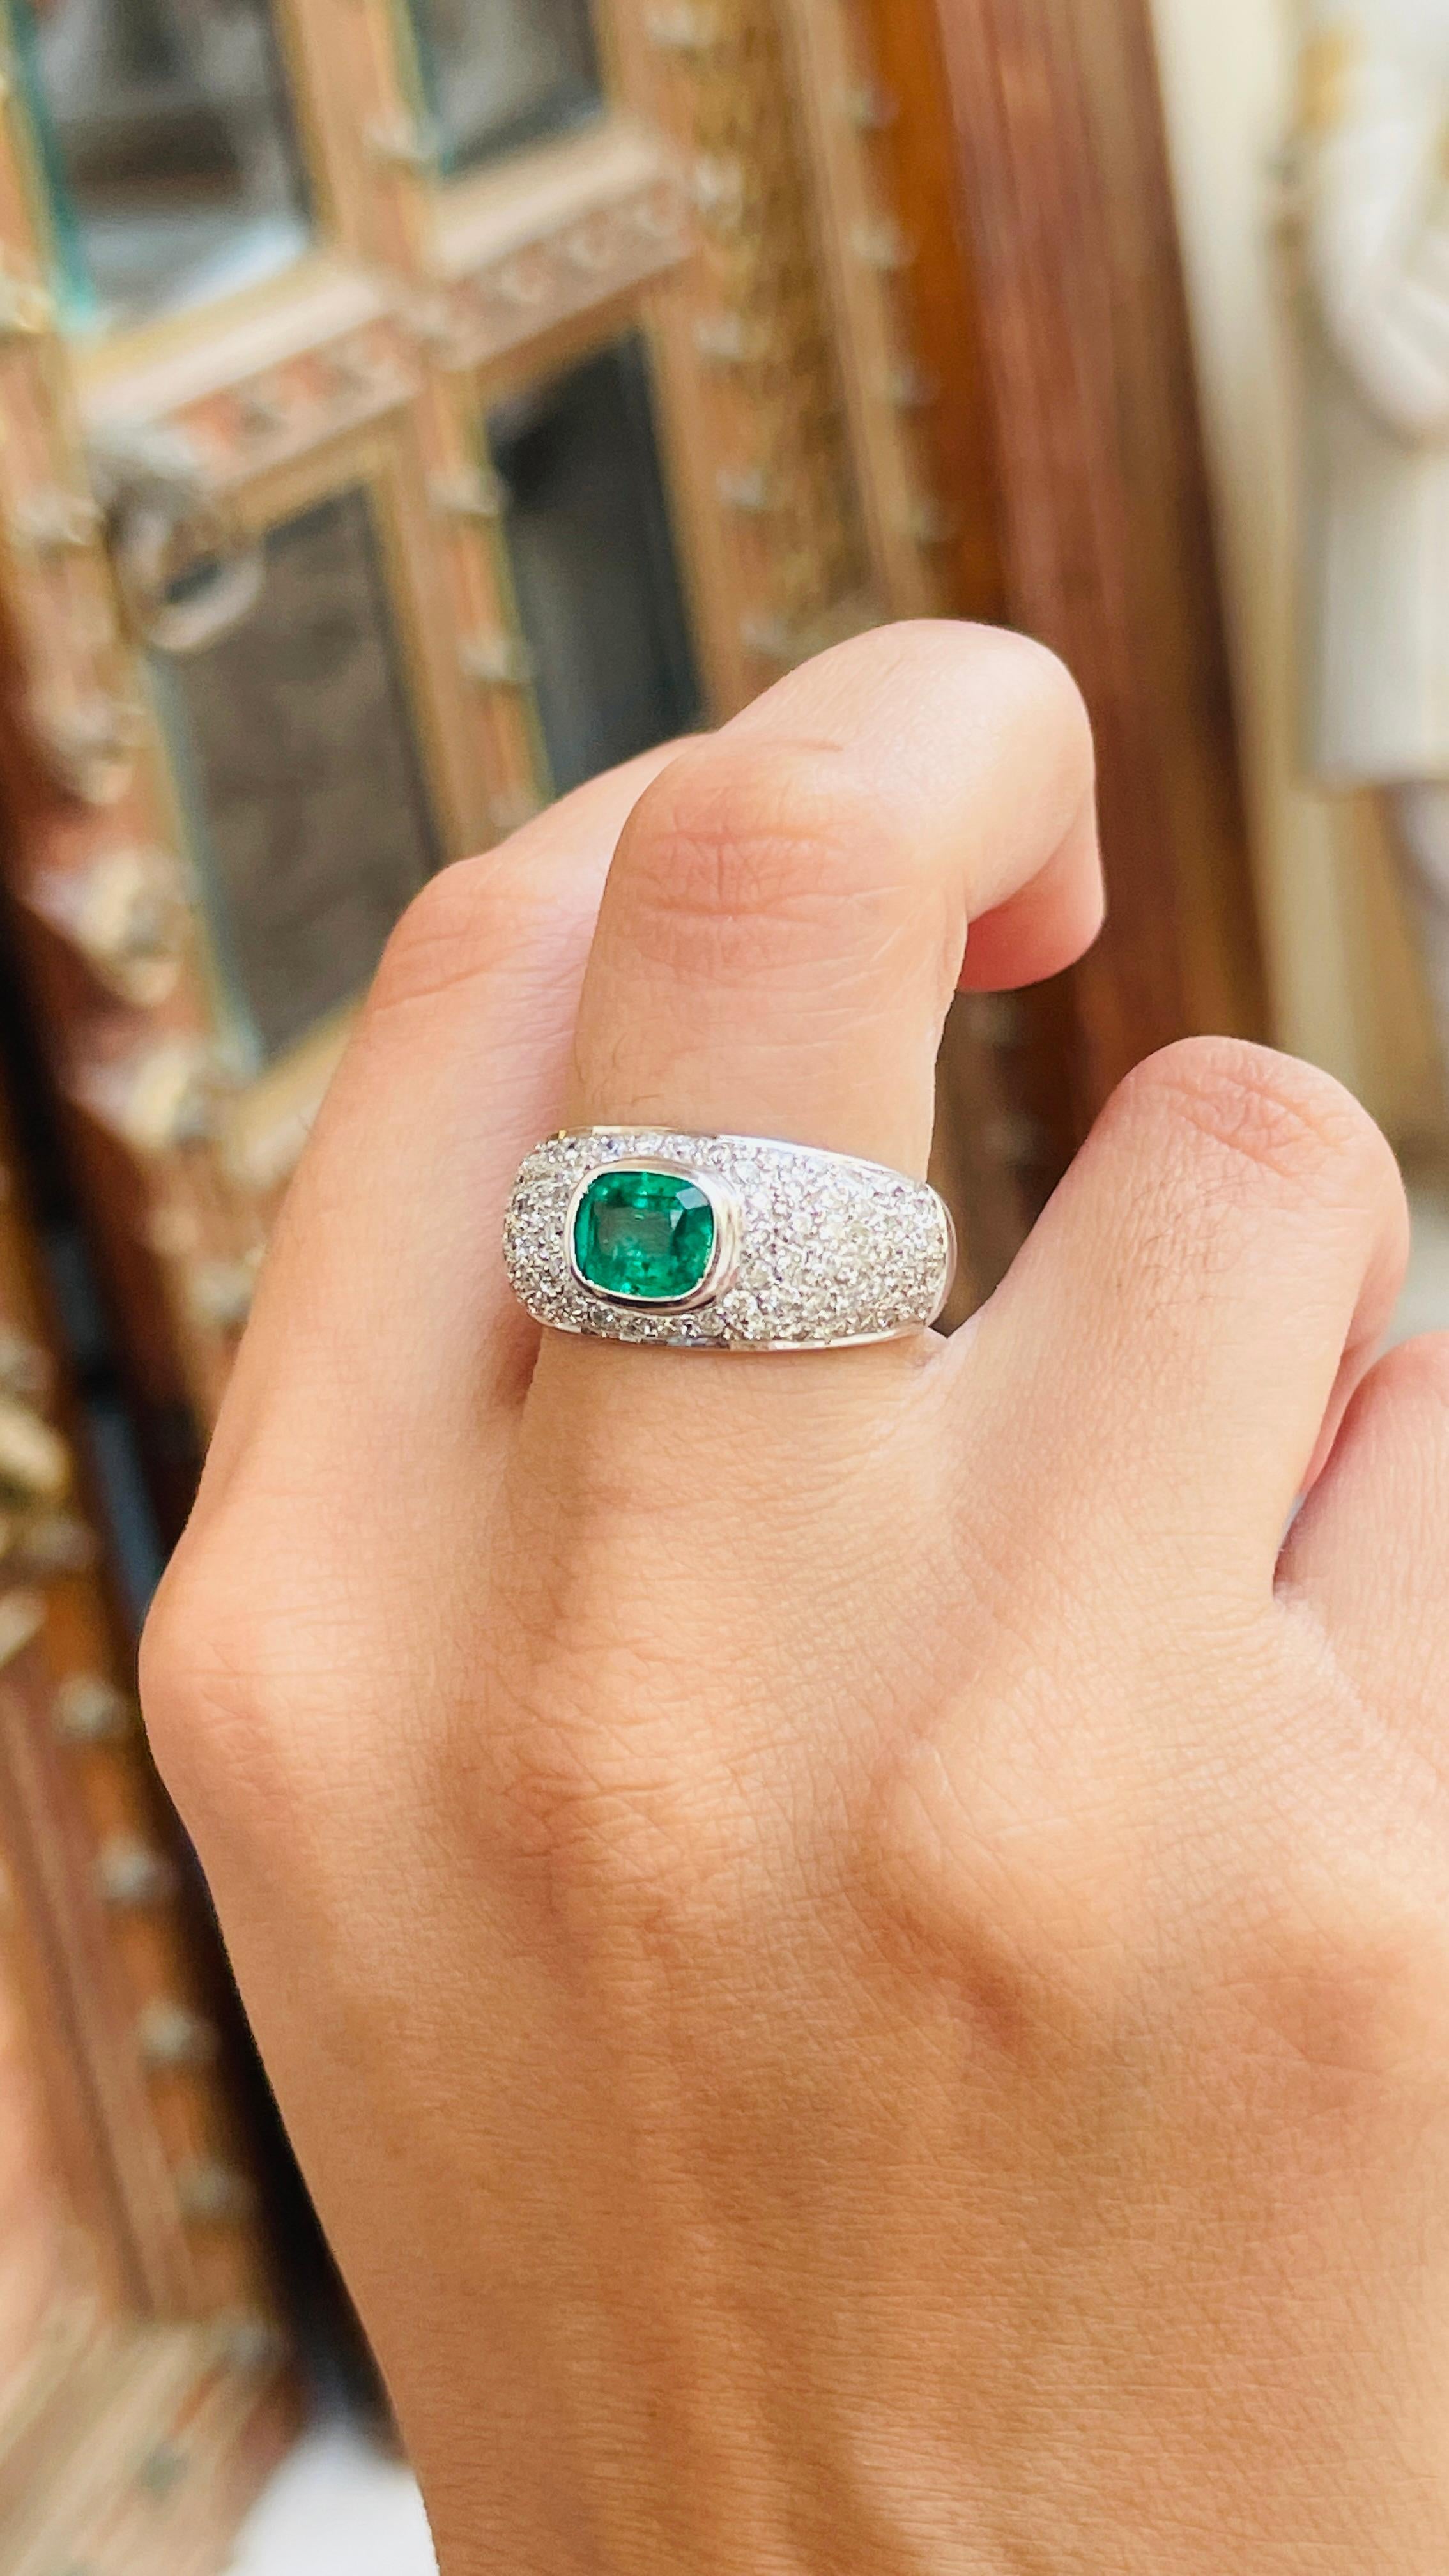 For Sale:  18K White Gold Emerald Ring Along with Clustered Diamonds  11